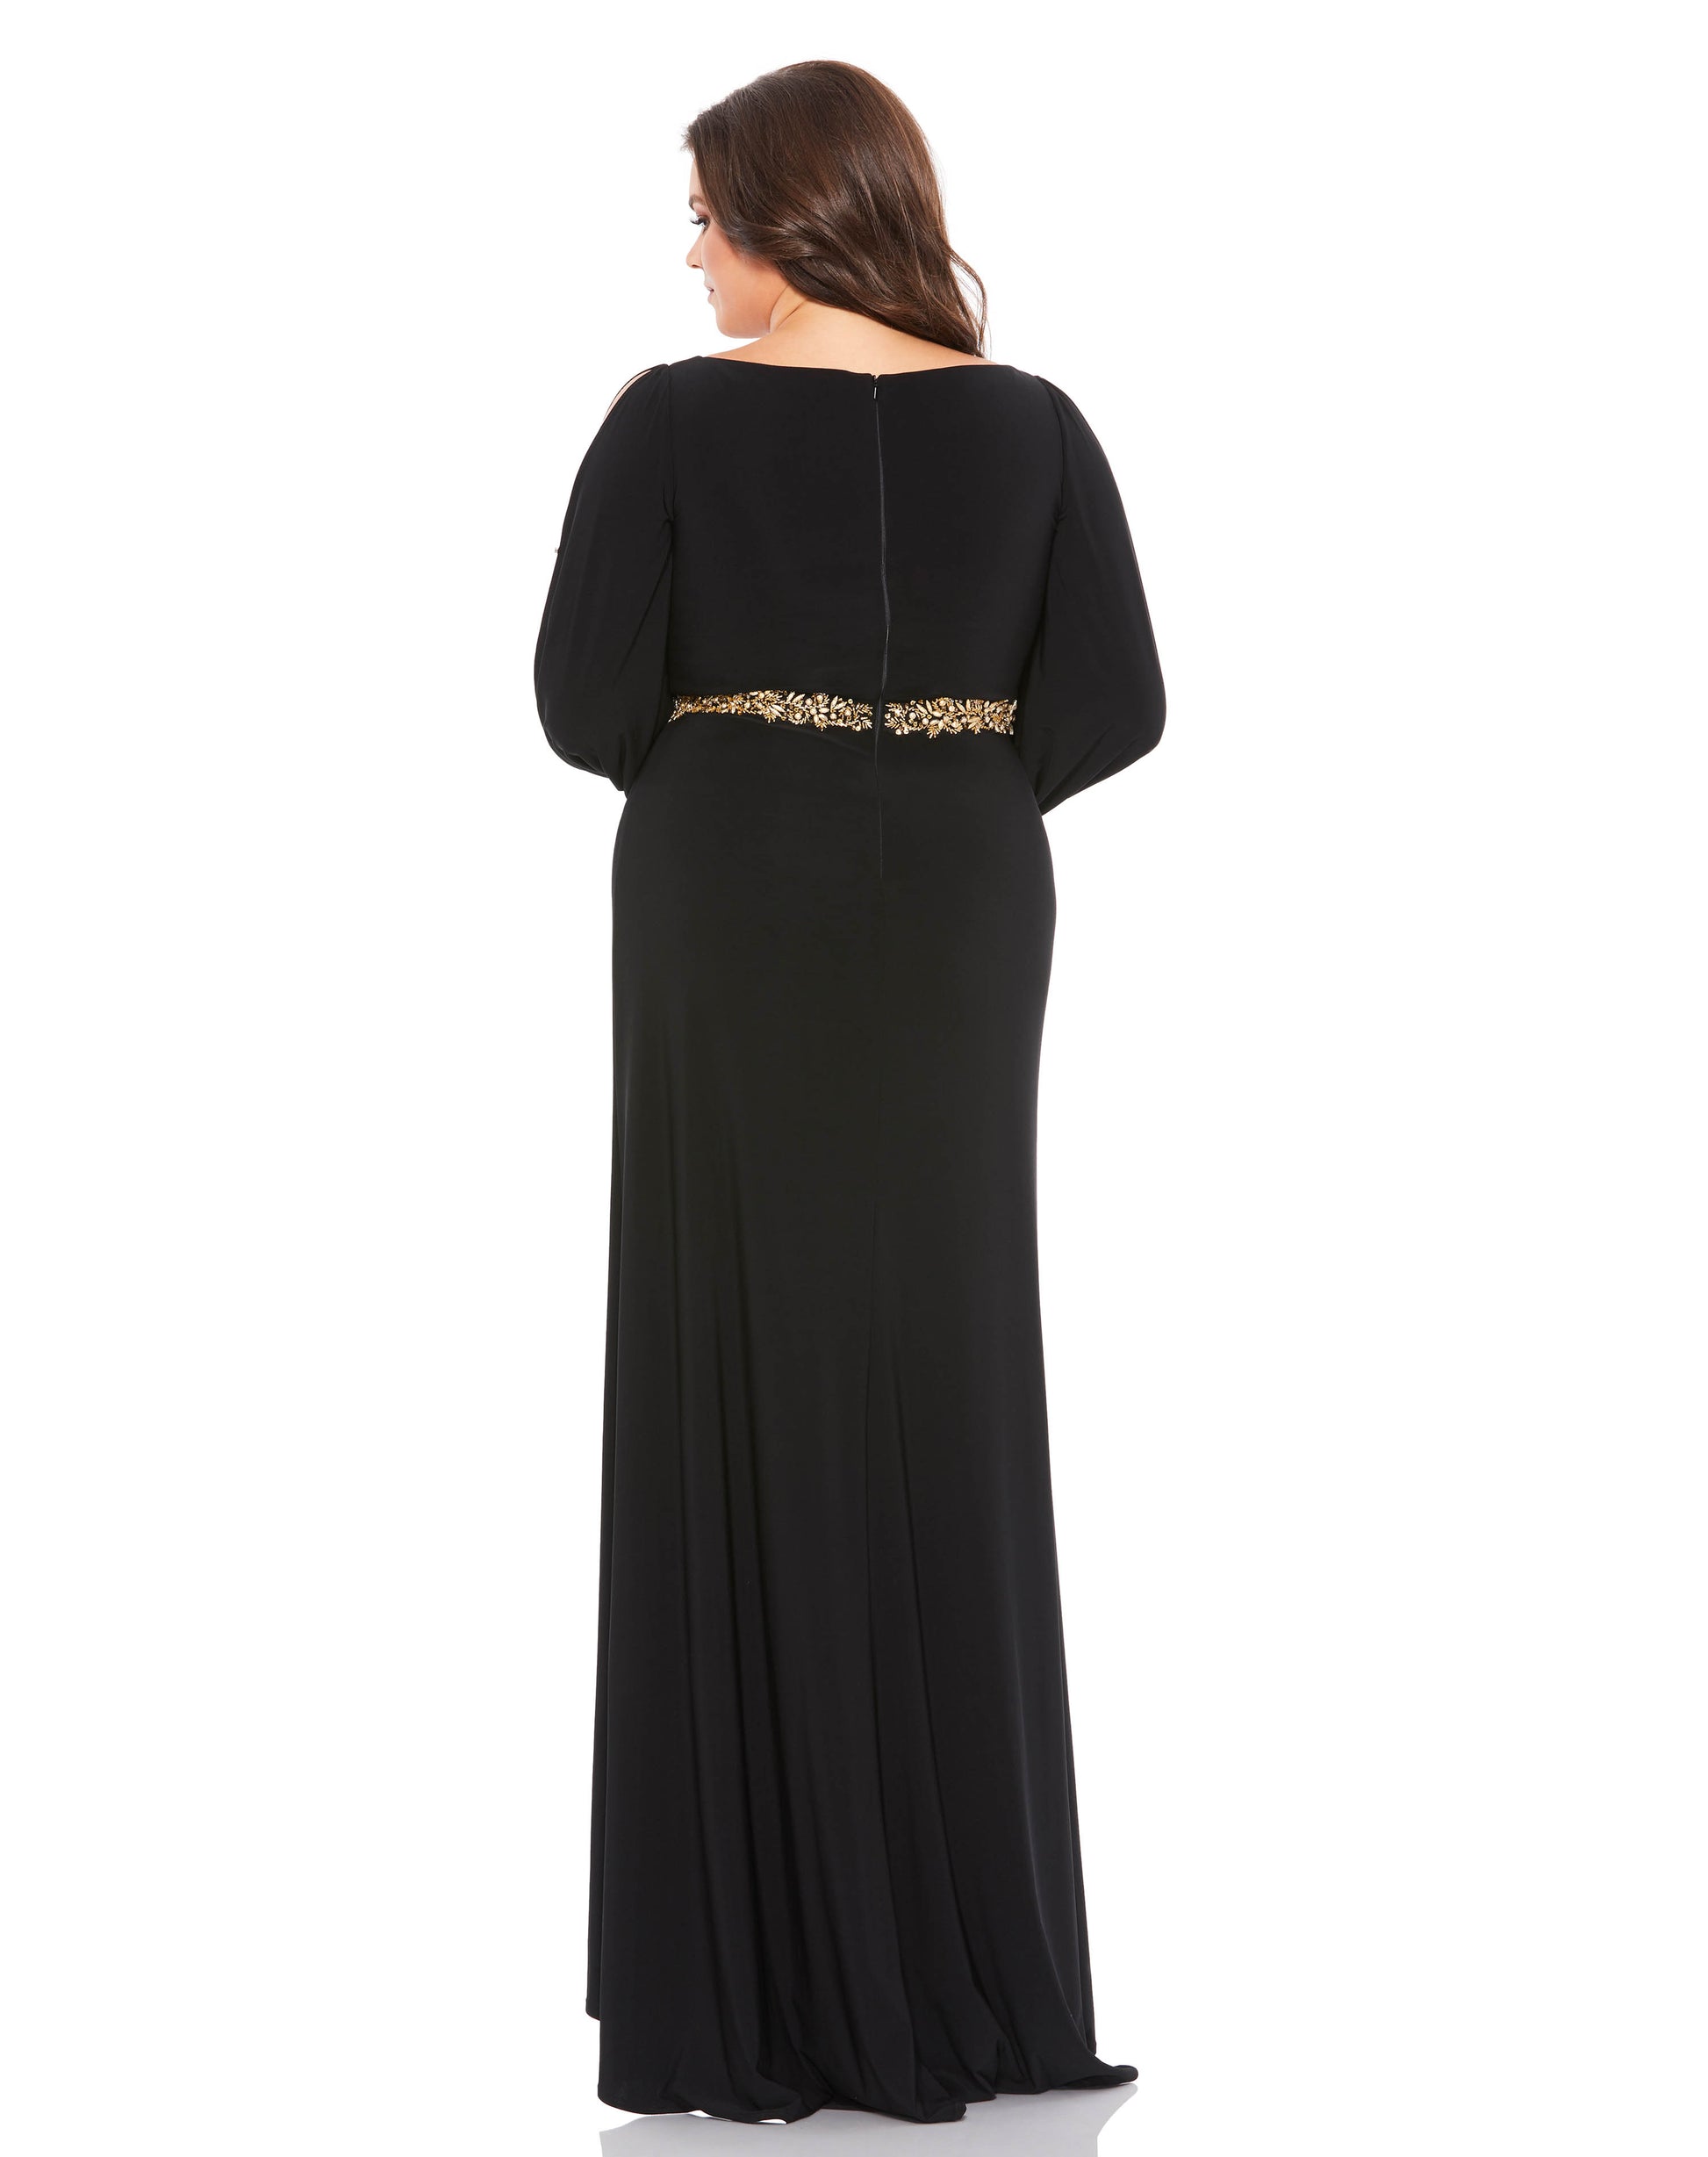 Elegant floor-length gown with a faux-wrap v-neckline, gathered waist, long split sleeves, and a thigh-high slit. A hand-embellished belt defines the natural waist. Mac Duggal 100% Polyester Back Zipper Long Sleeves V-Neck Full Length Style #67747